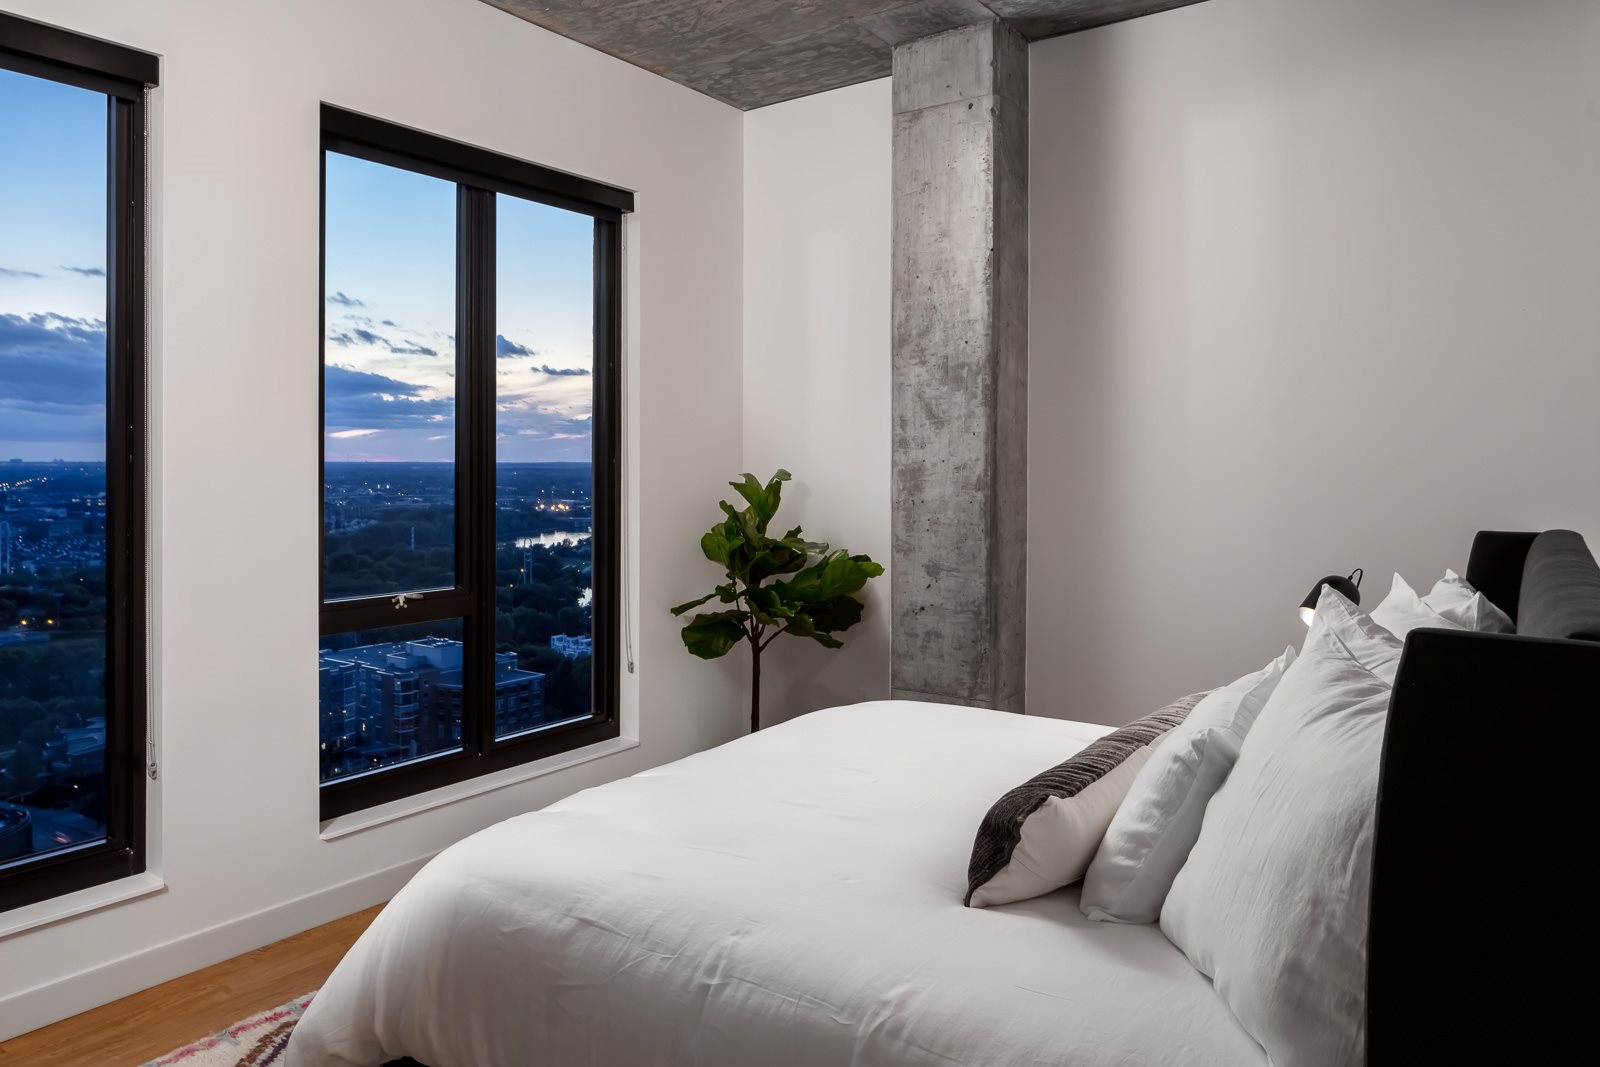 Penthouse bedroom with unobstructed view